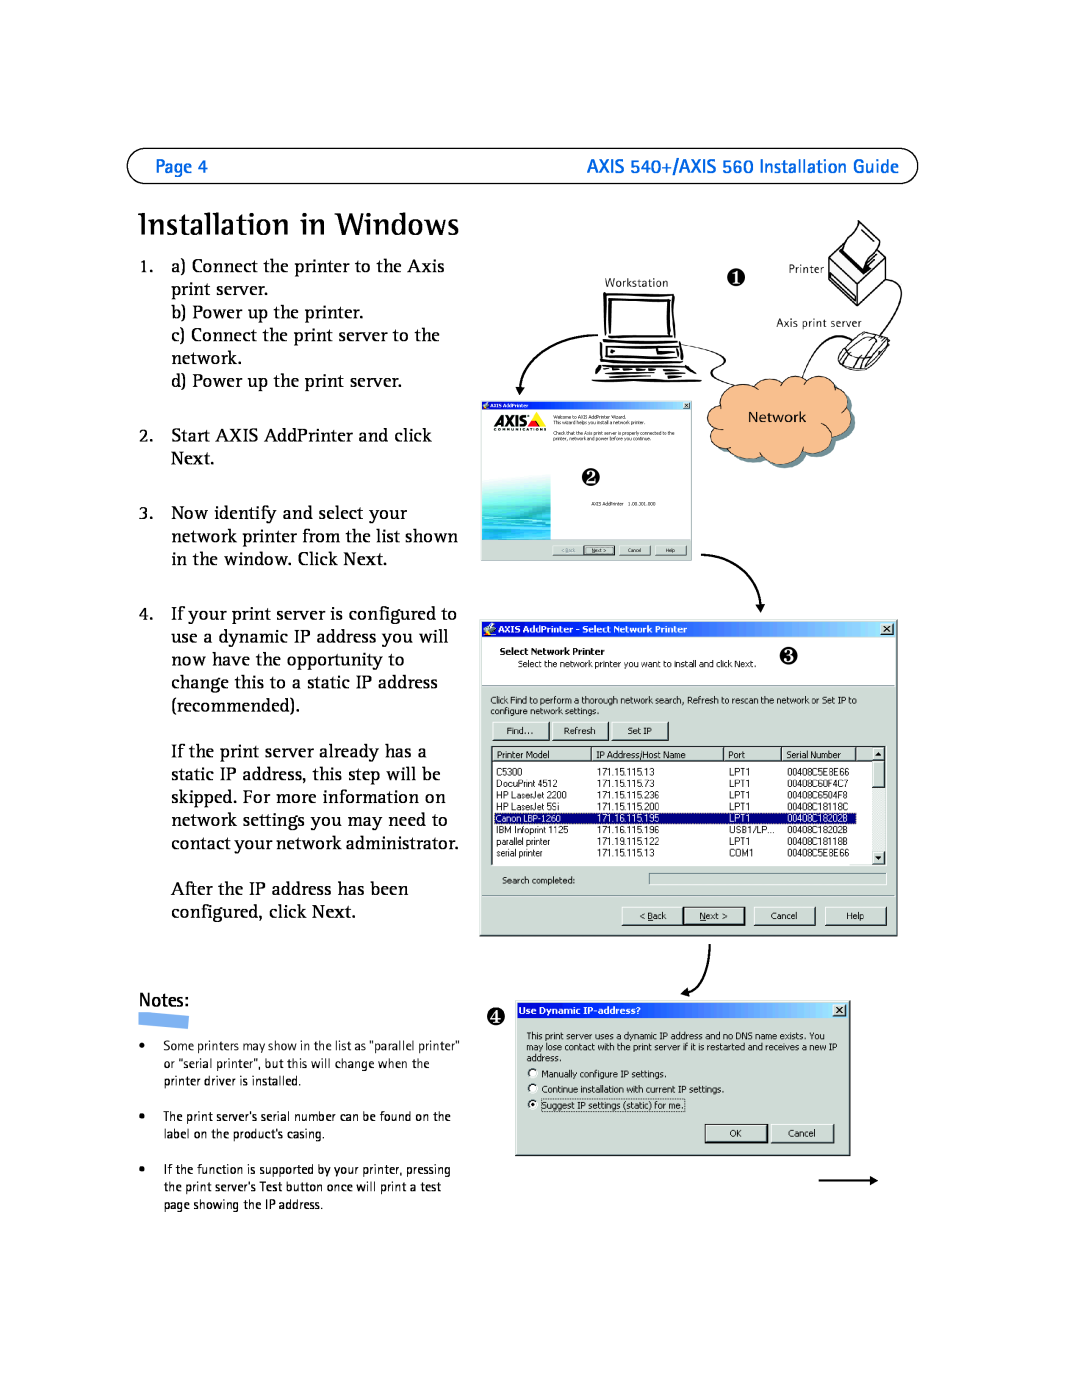 Axis Communications manual Installation in Windows, ❶ ❷ ❸, Page, AXIS 540+/AXIS 560 Installation Guide 